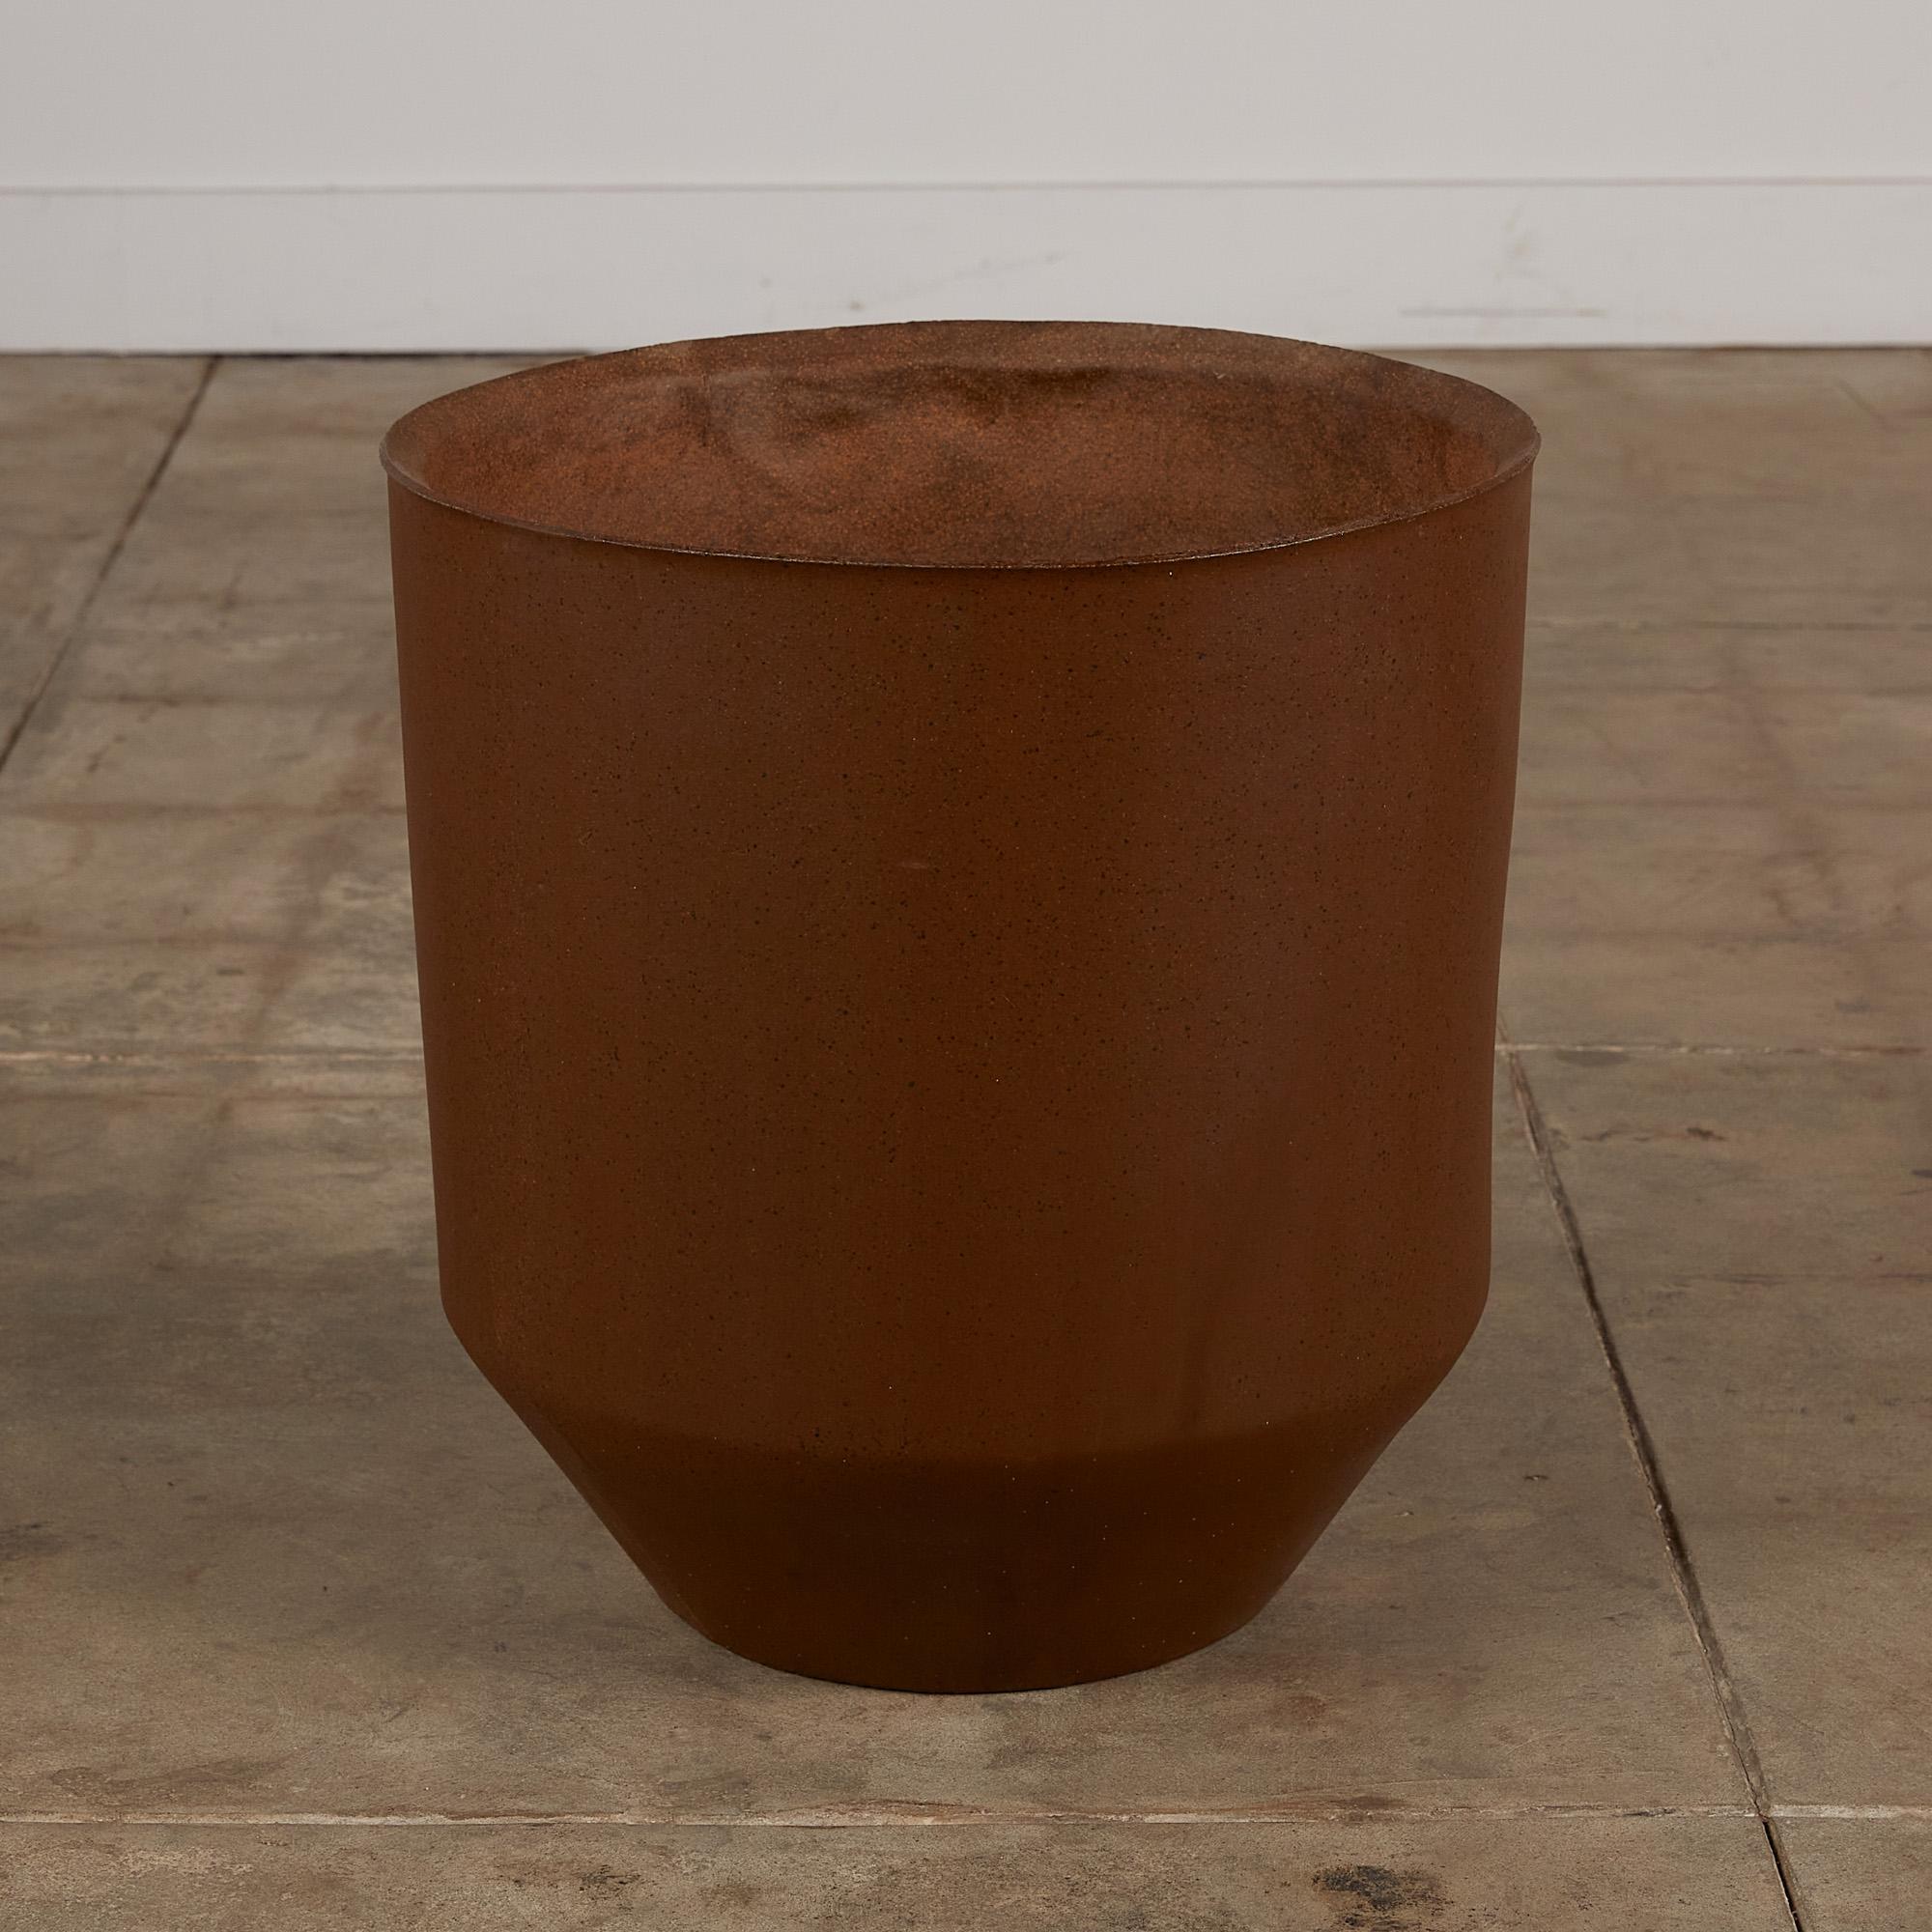 An AP-5049 planter by David Cressey from the Pro/Artisan collection for Architectural Pottery. This stoneware planter has a soft speckled unglazed interior as well as an unglazed natural warm brown clay exterior. The top of the planter has slightly